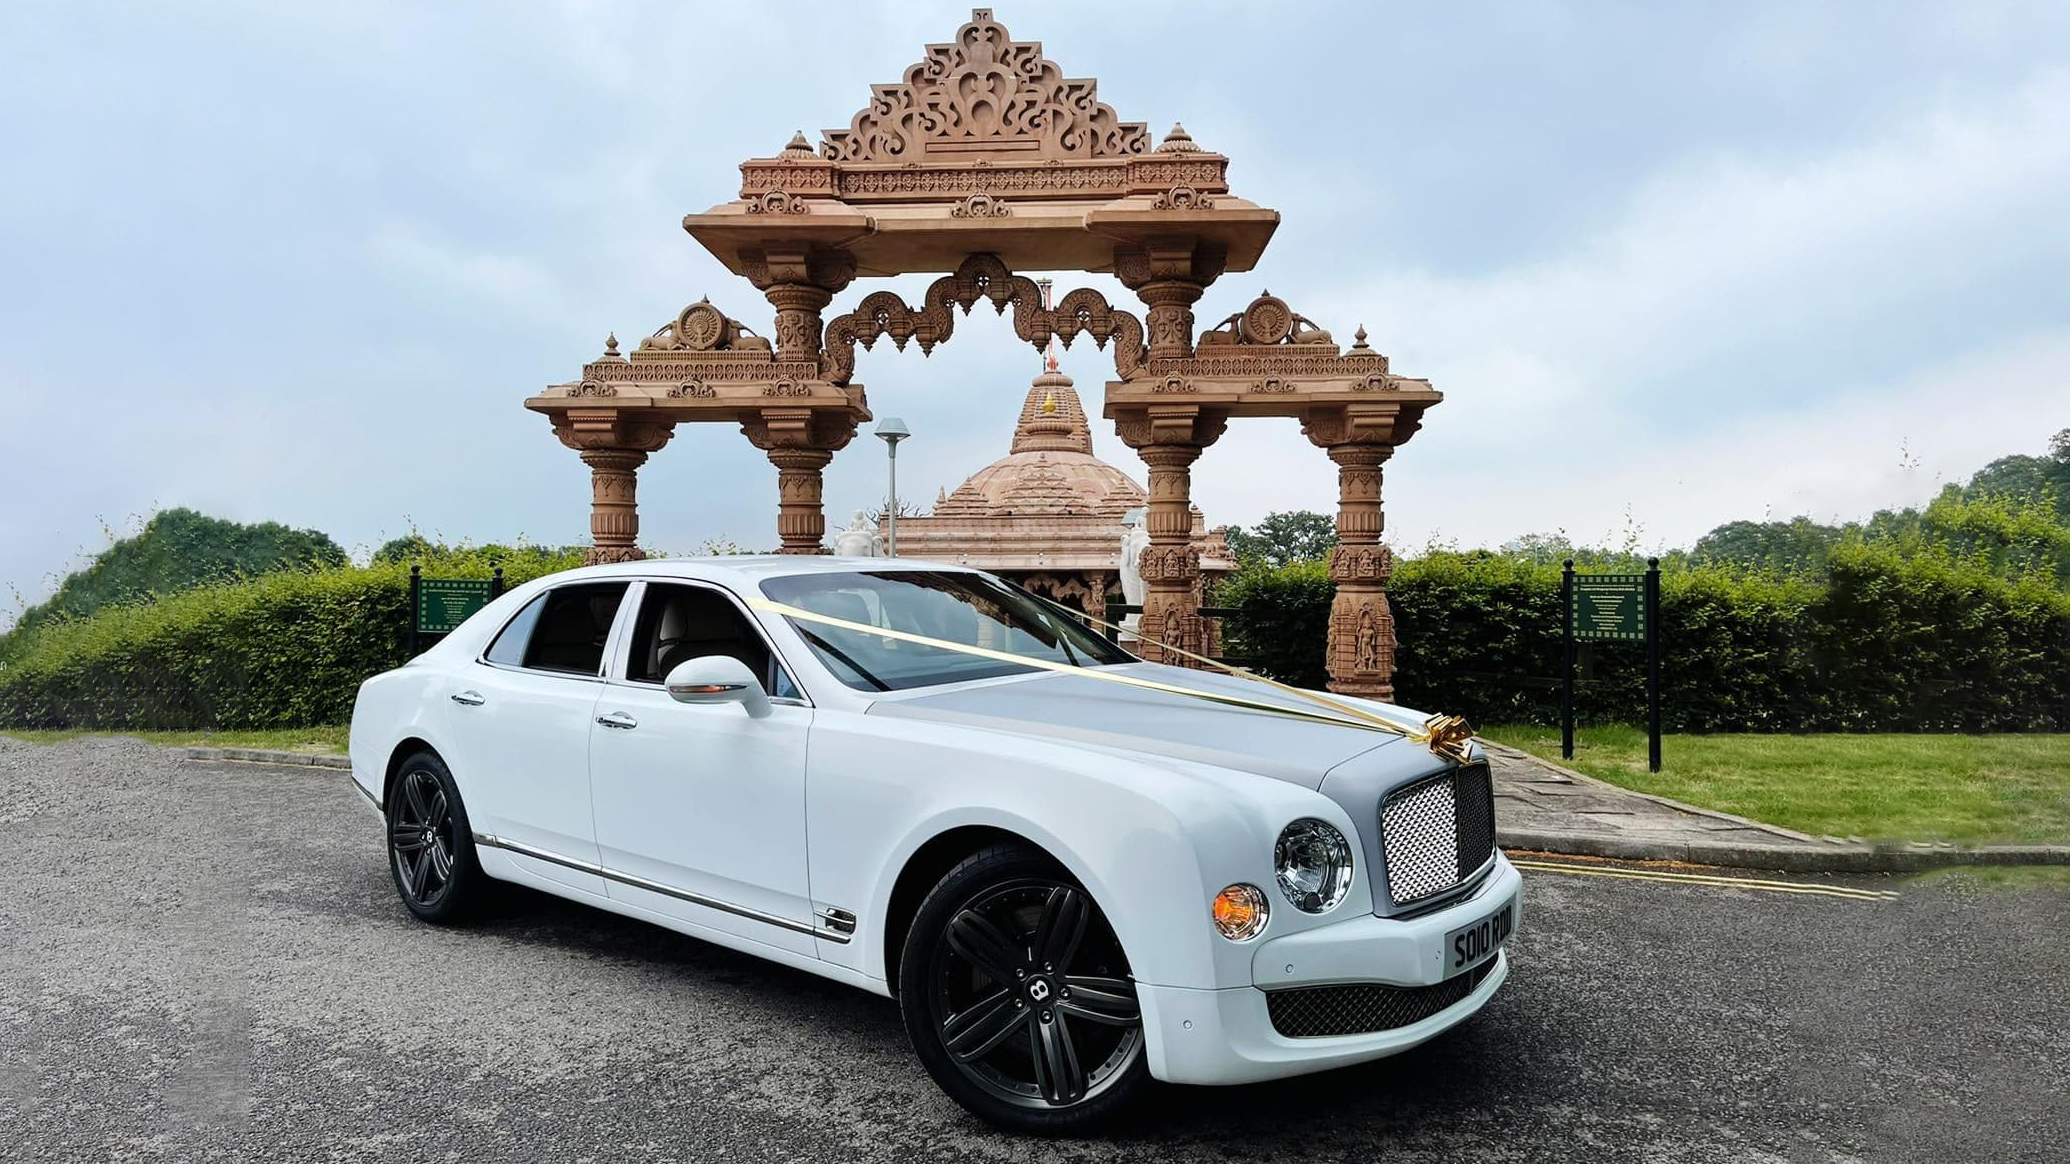 Modern Bentley Mulsanne with Black alloy wheels and Gold ribbons park in front of an Asian Temple in Biggleswade.